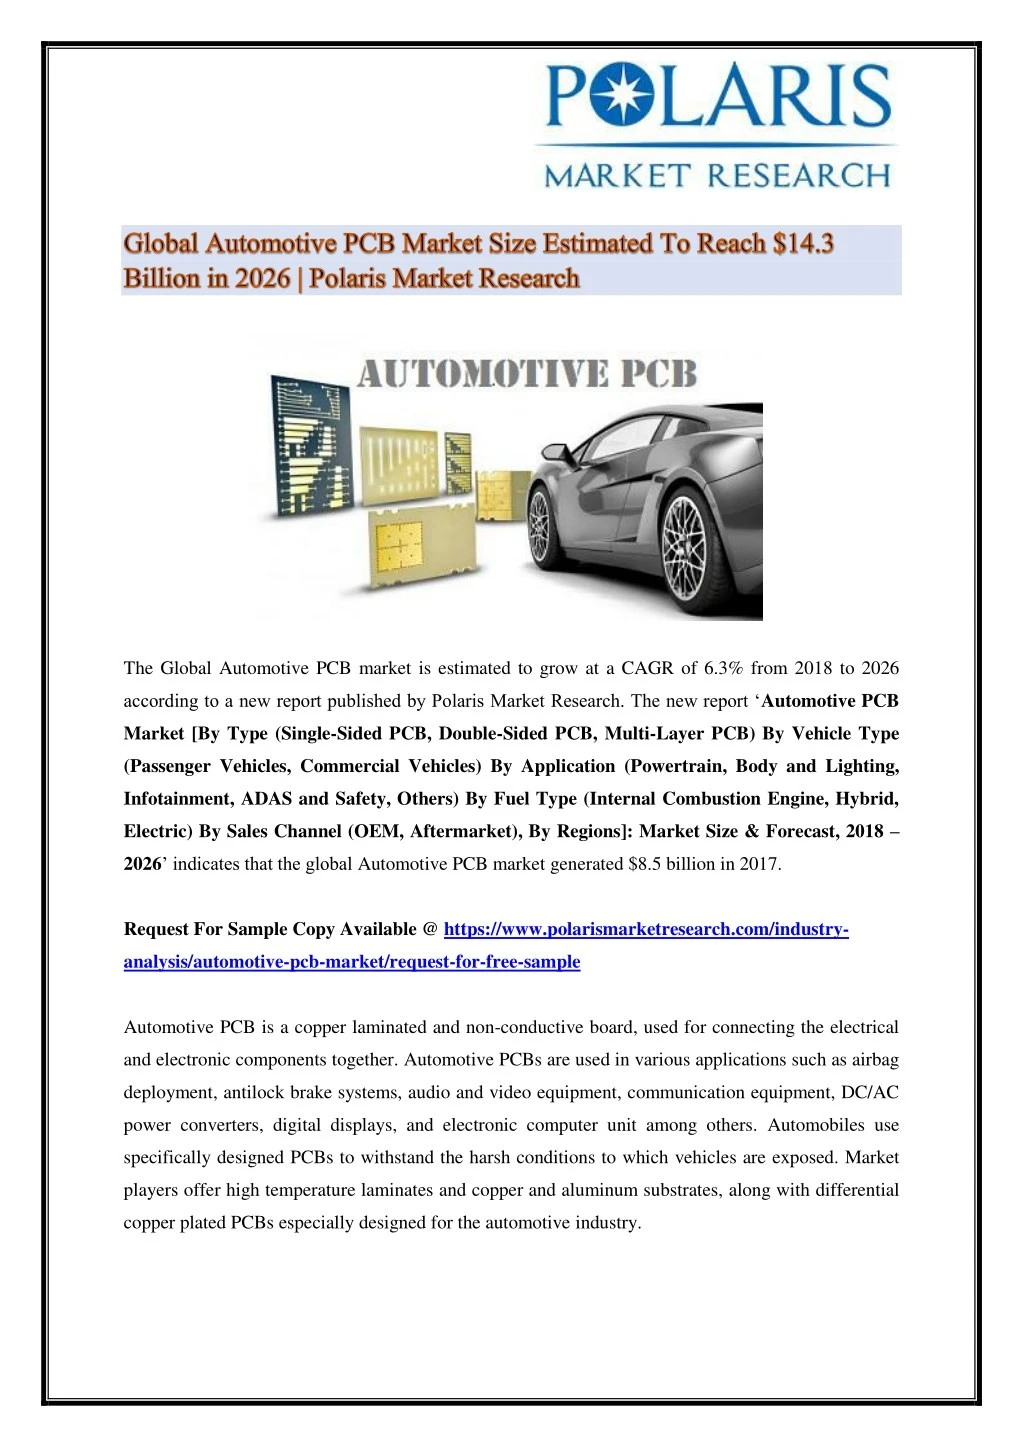 the global automotive pcb market is estimated